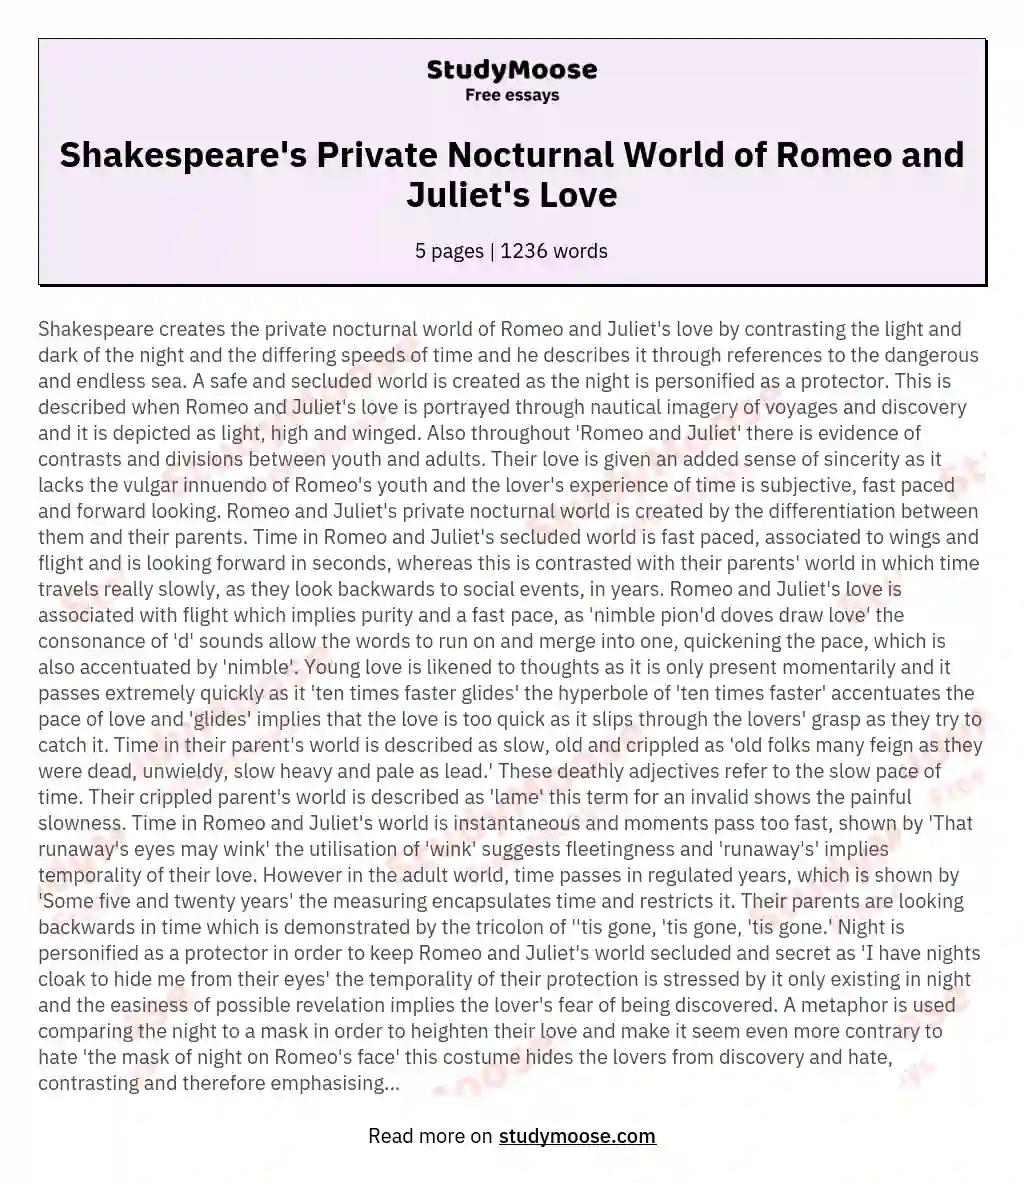 Shakespeare's Private Nocturnal World of Romeo and Juliet's Love essay